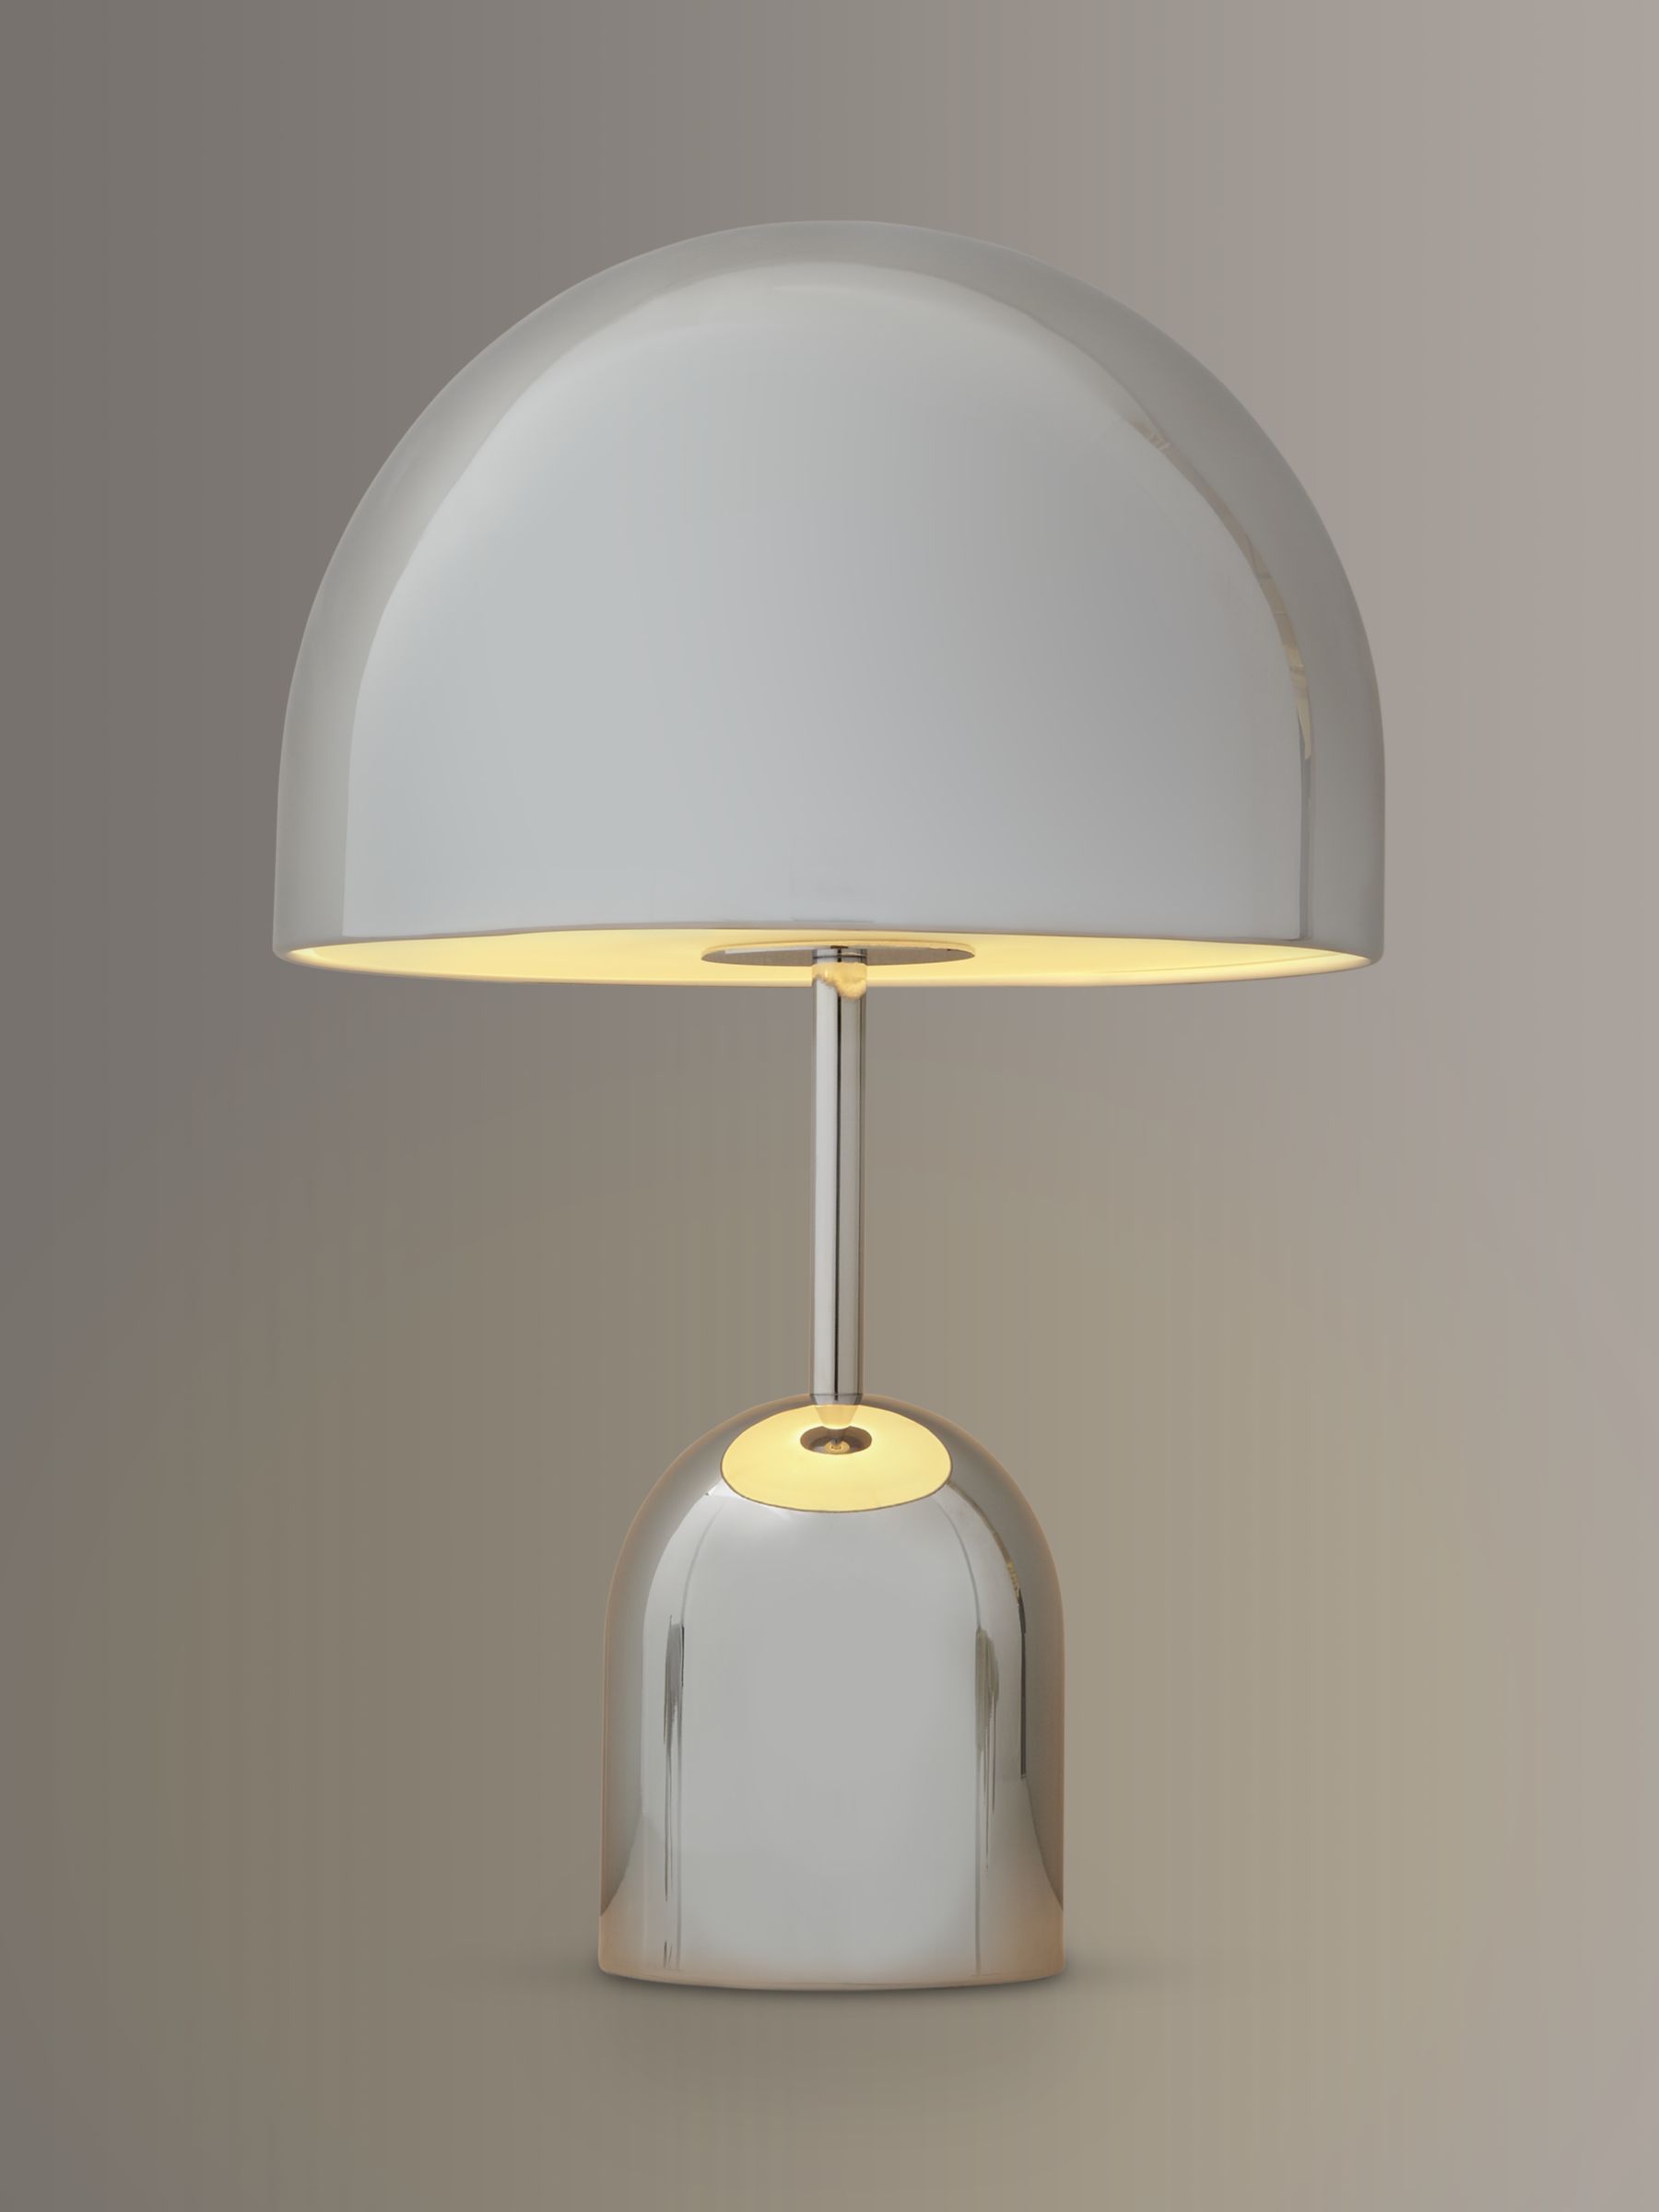 Photo of Tom dixon bell table lamp